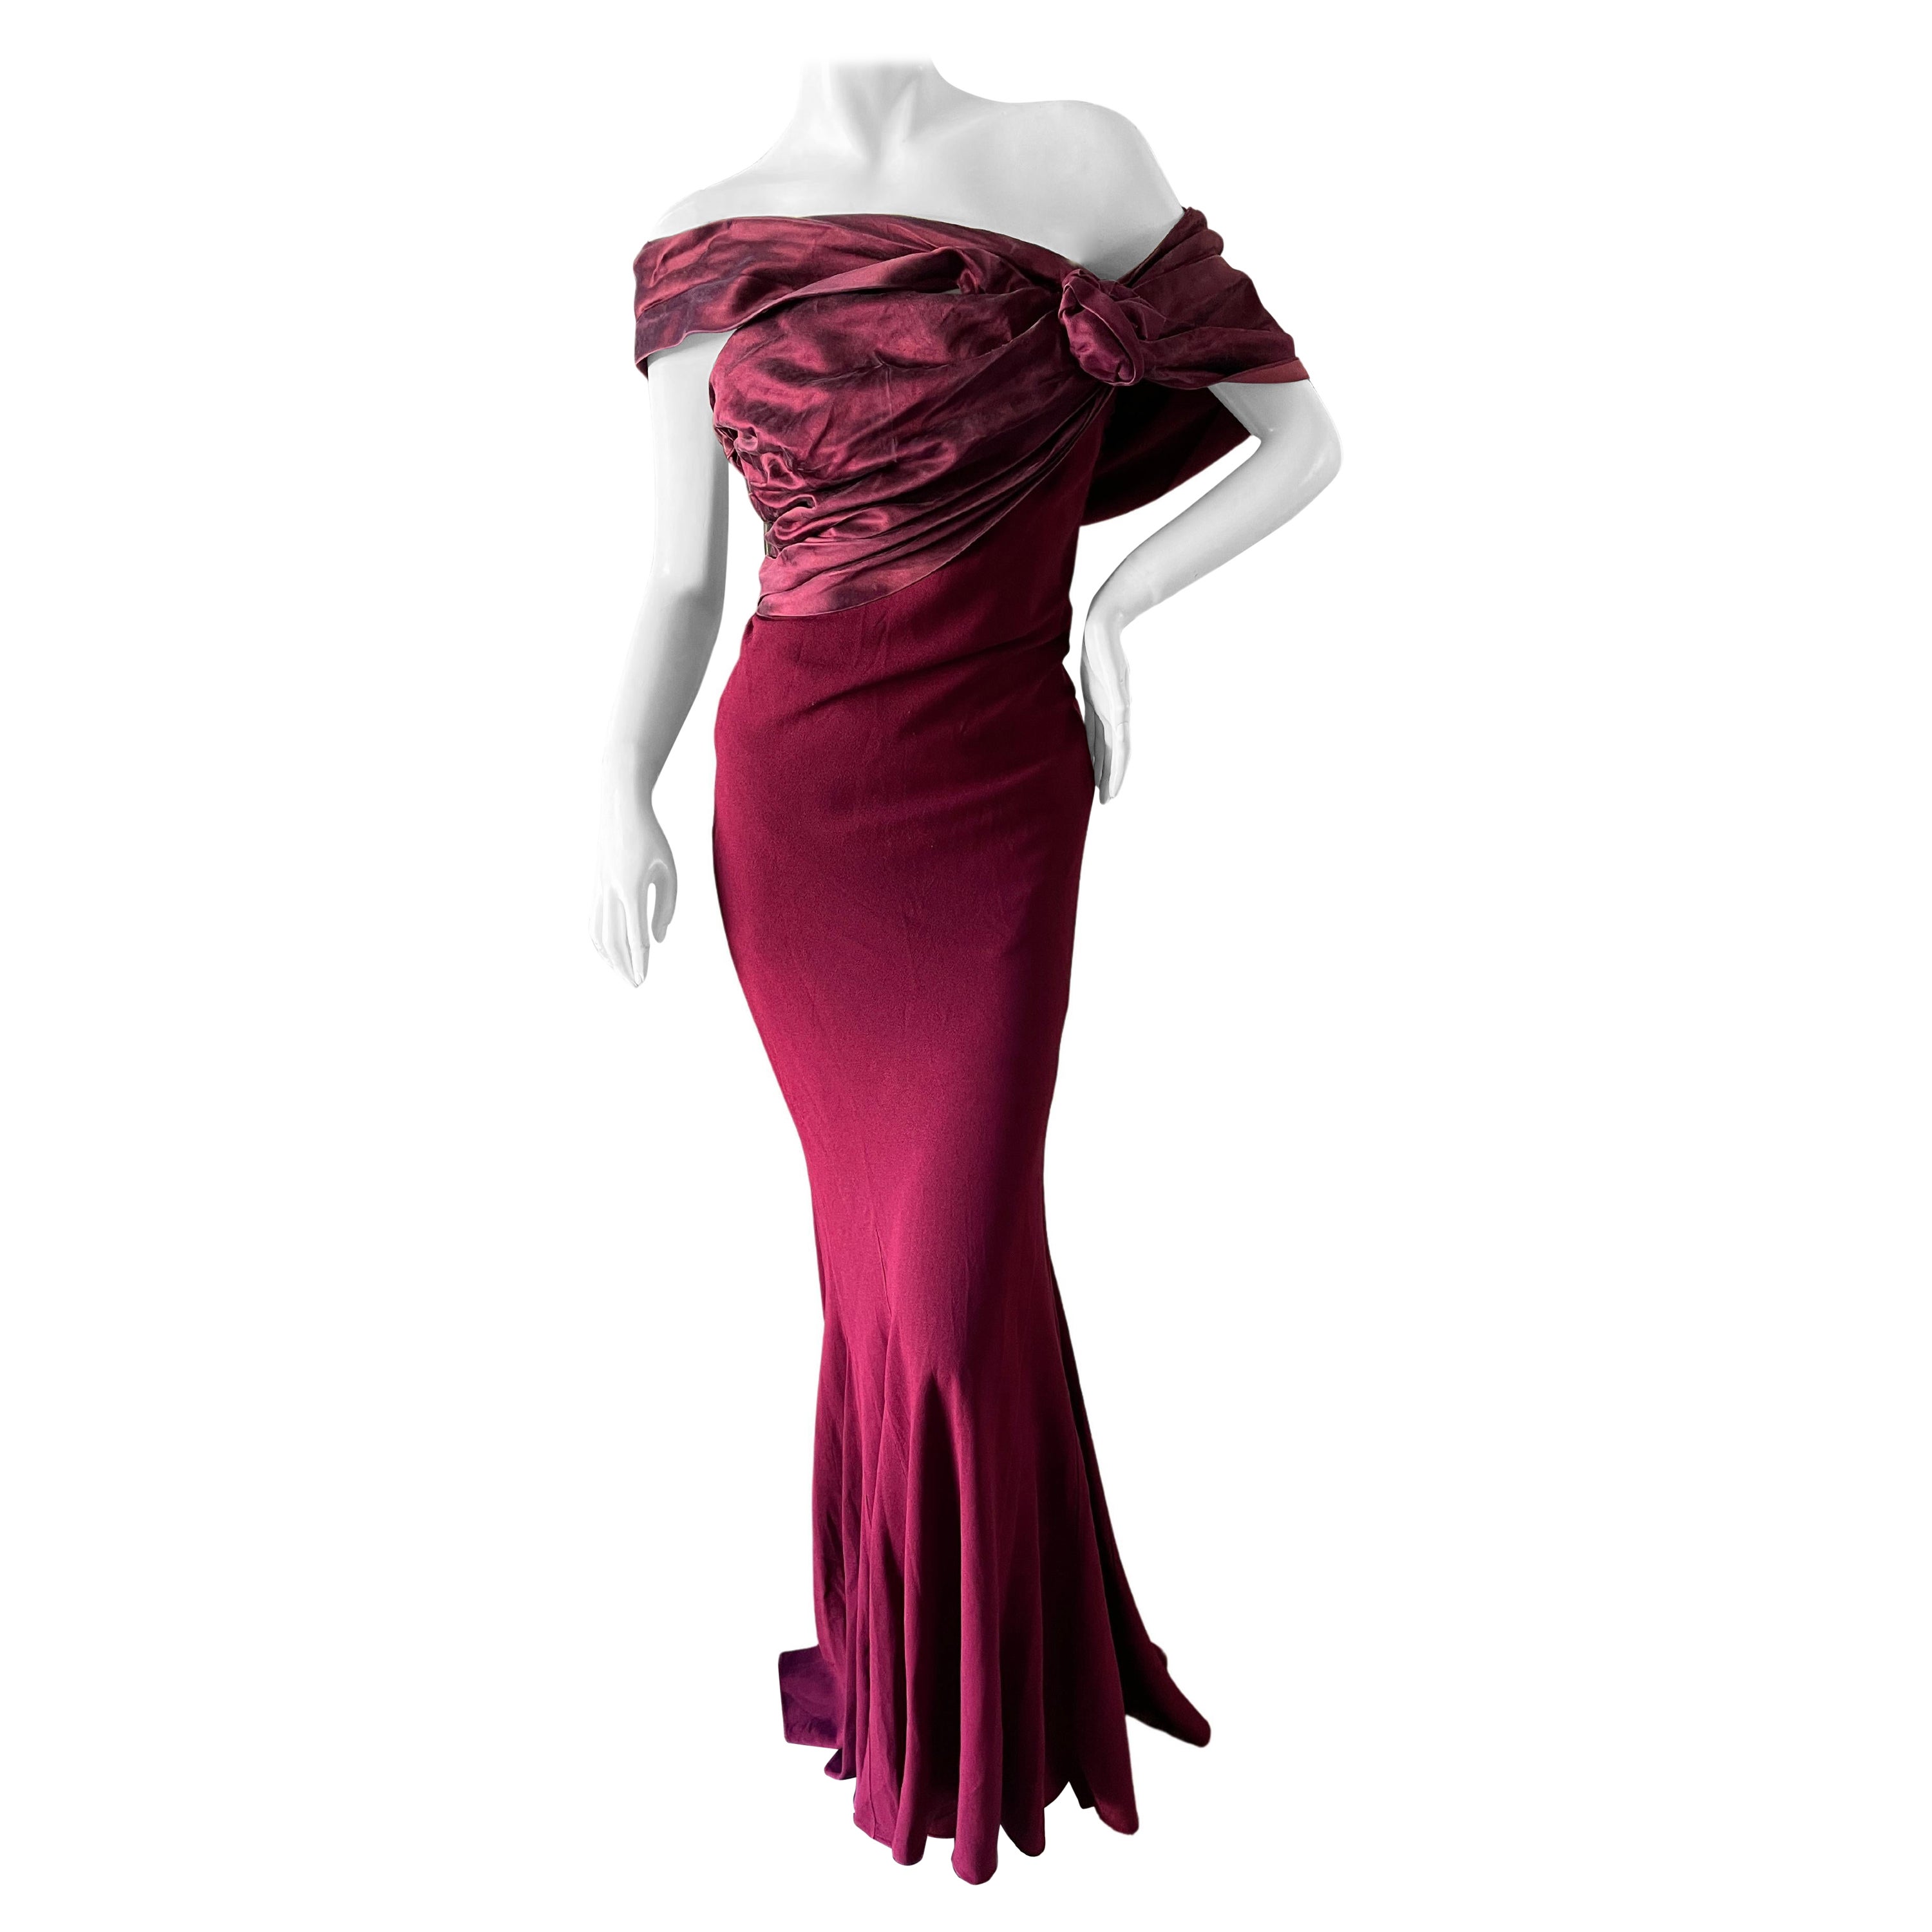 Christian Dior by John Galliano Burgundy Red Draped Evening Dress For Sale